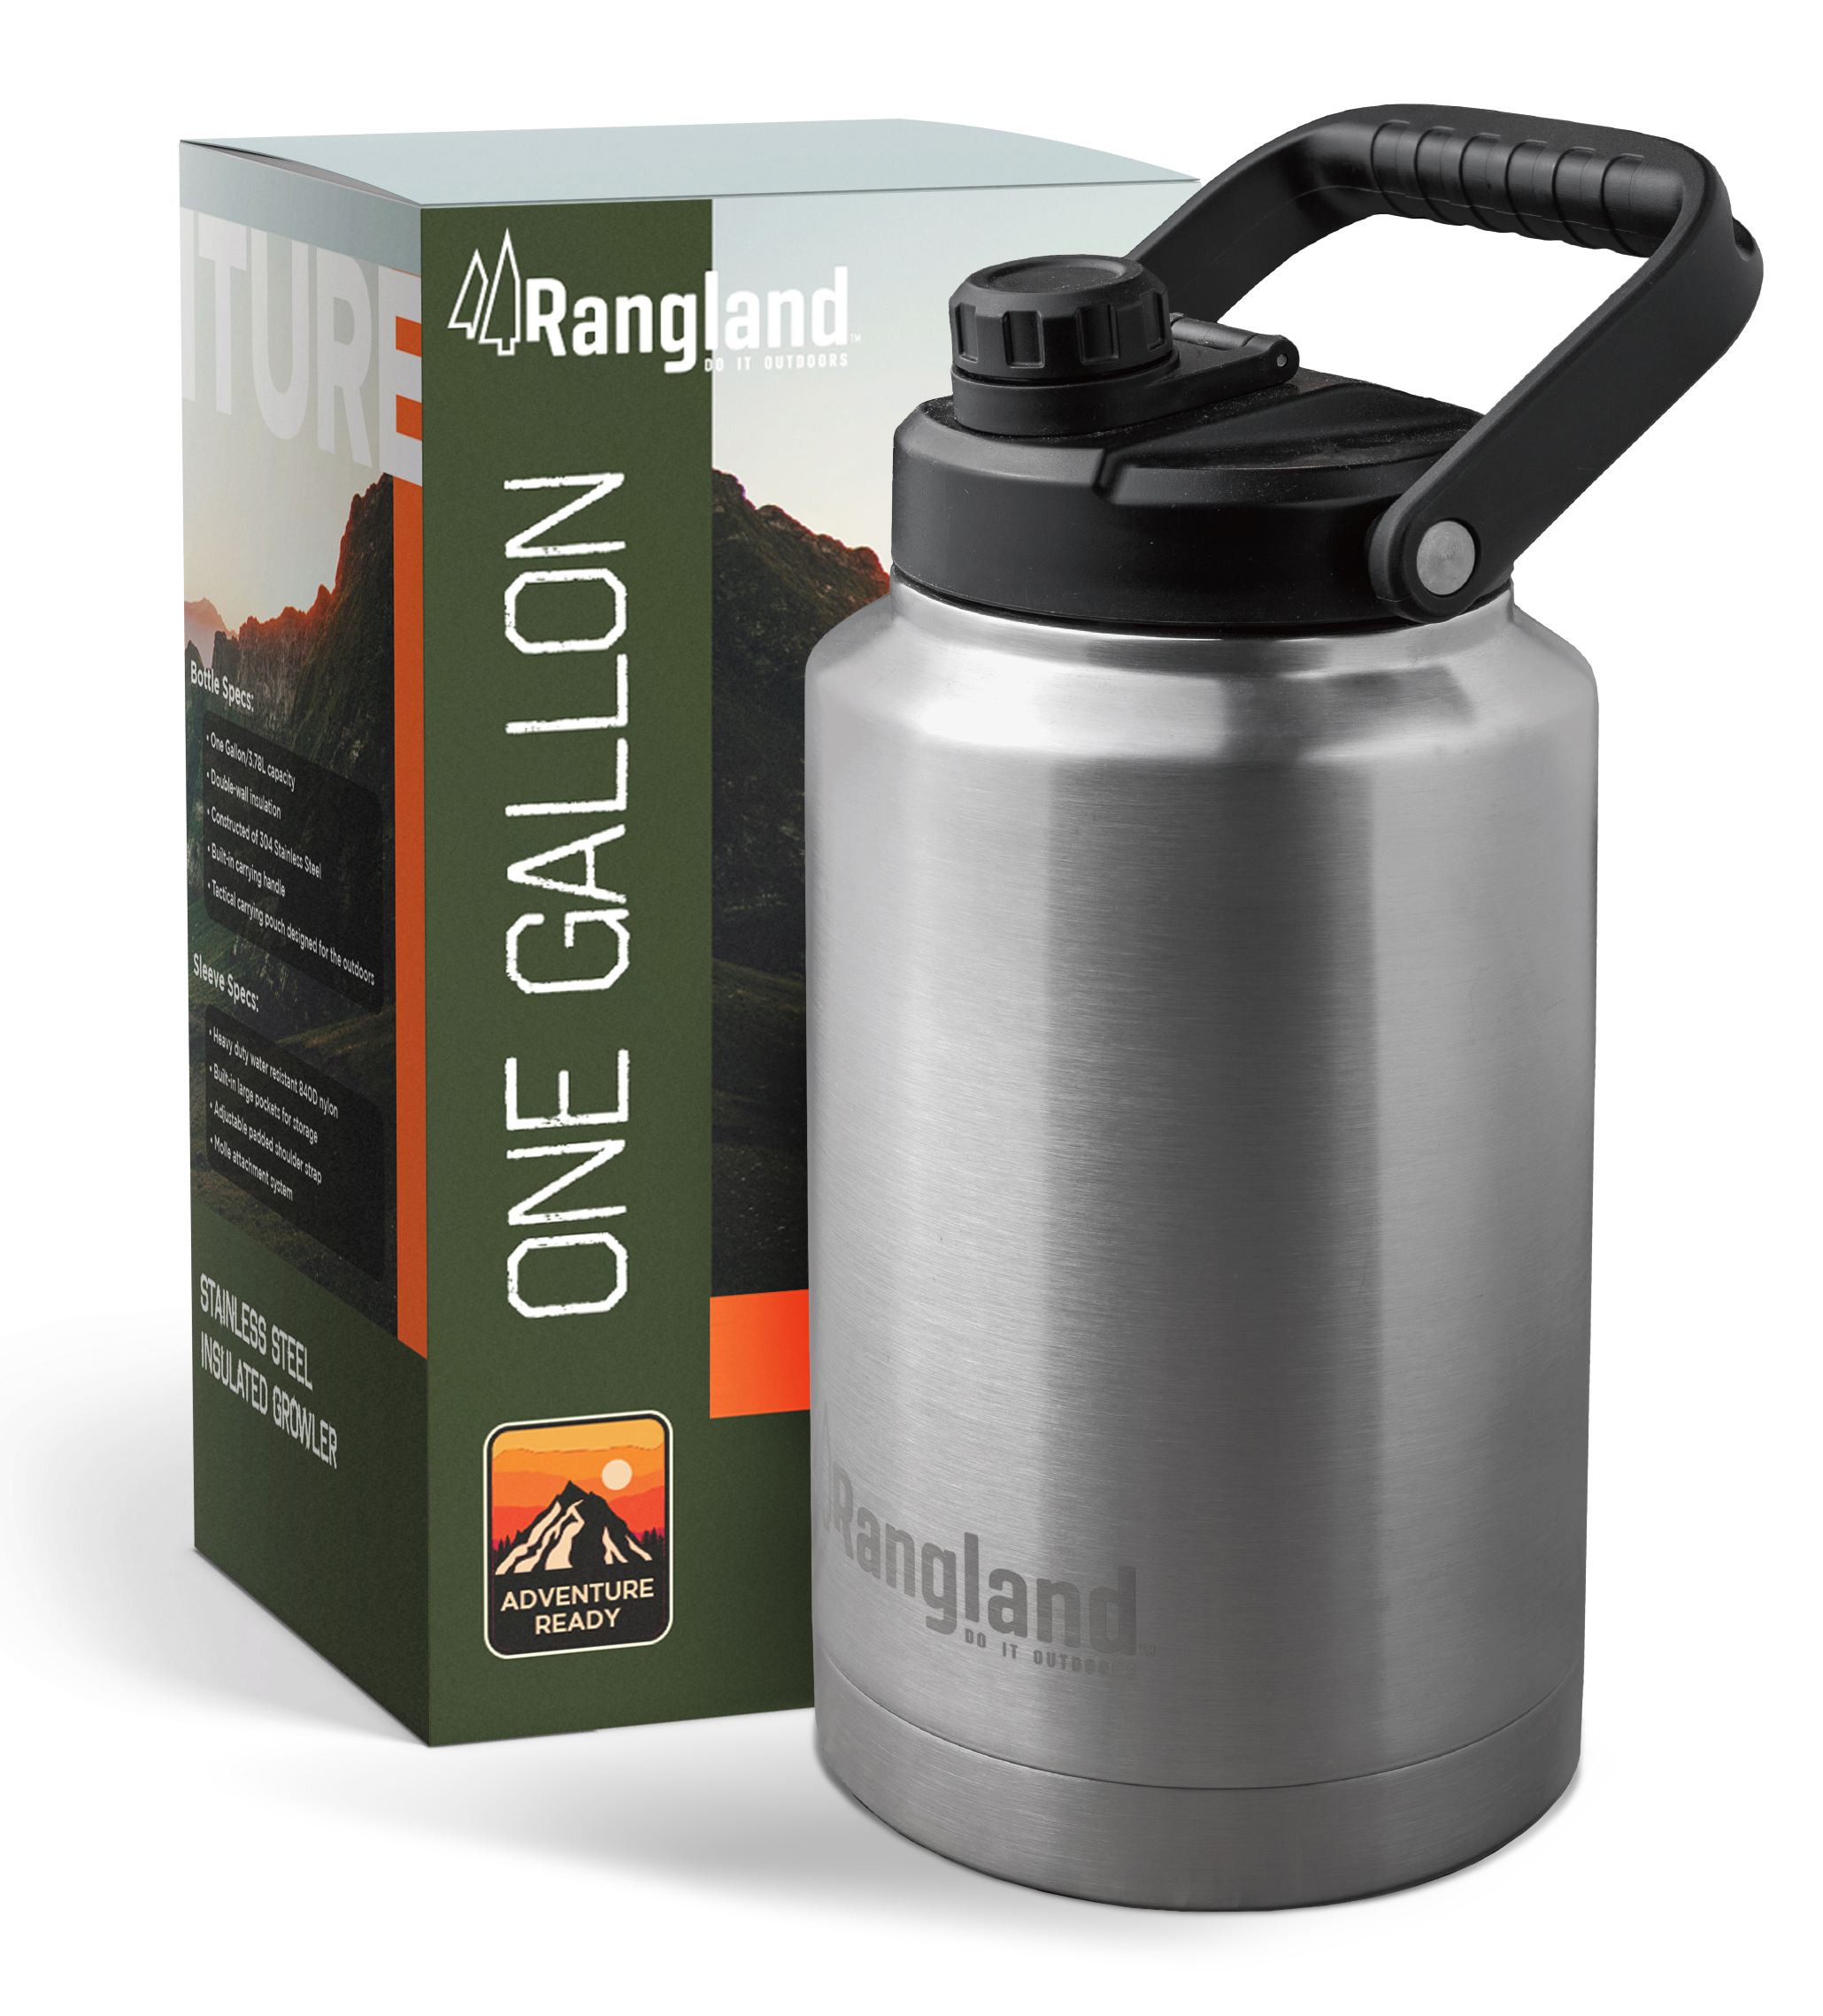 Rangland 1 Gallon Water Bottle with Insulated Storage Sleeve, 128 oz Stainless Steel Growler for Hot/Cold Drinks for Sports and Outdoors, Gray